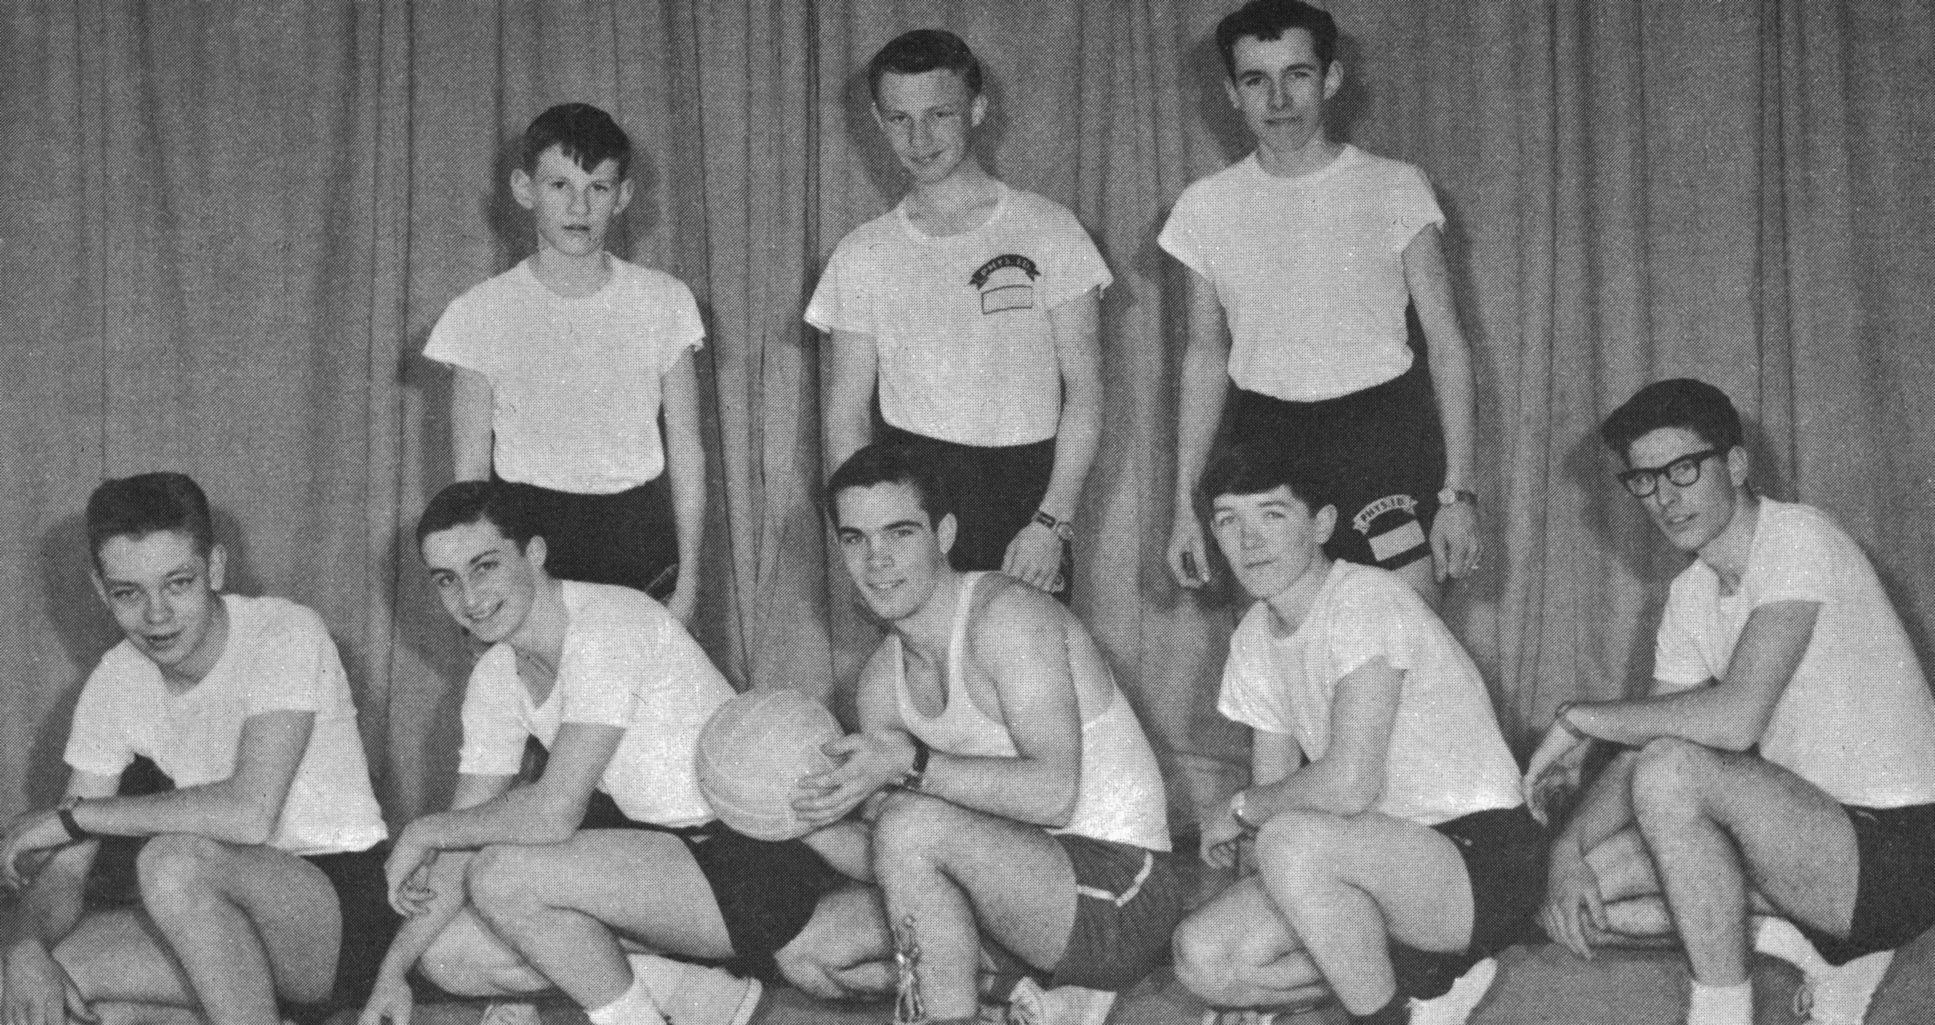 (Click to magnify) FRONT ROW: T. Arens, Wayne Foote, R. Long, Duncan McTavish, Dave Jackson; SECOND ROW: Ted Ballinger, S. Oldham, Larry Noble.